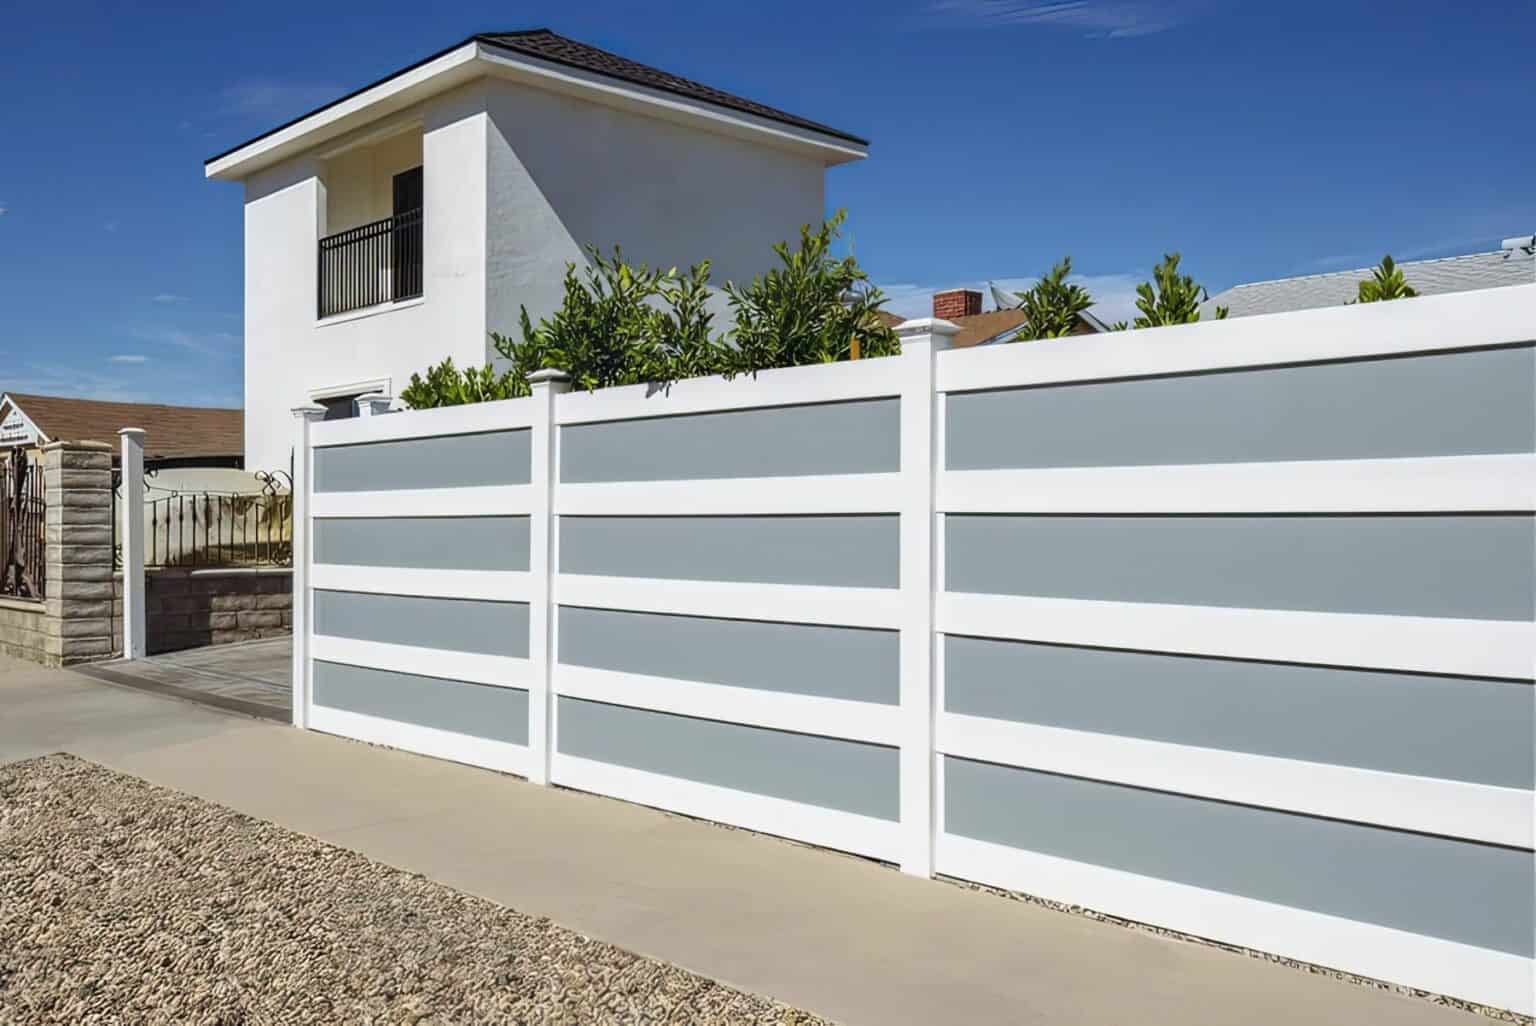 Vinyl & acrylic privacy fence beside concrete sidewalk, under clear sky, with trees in the background.